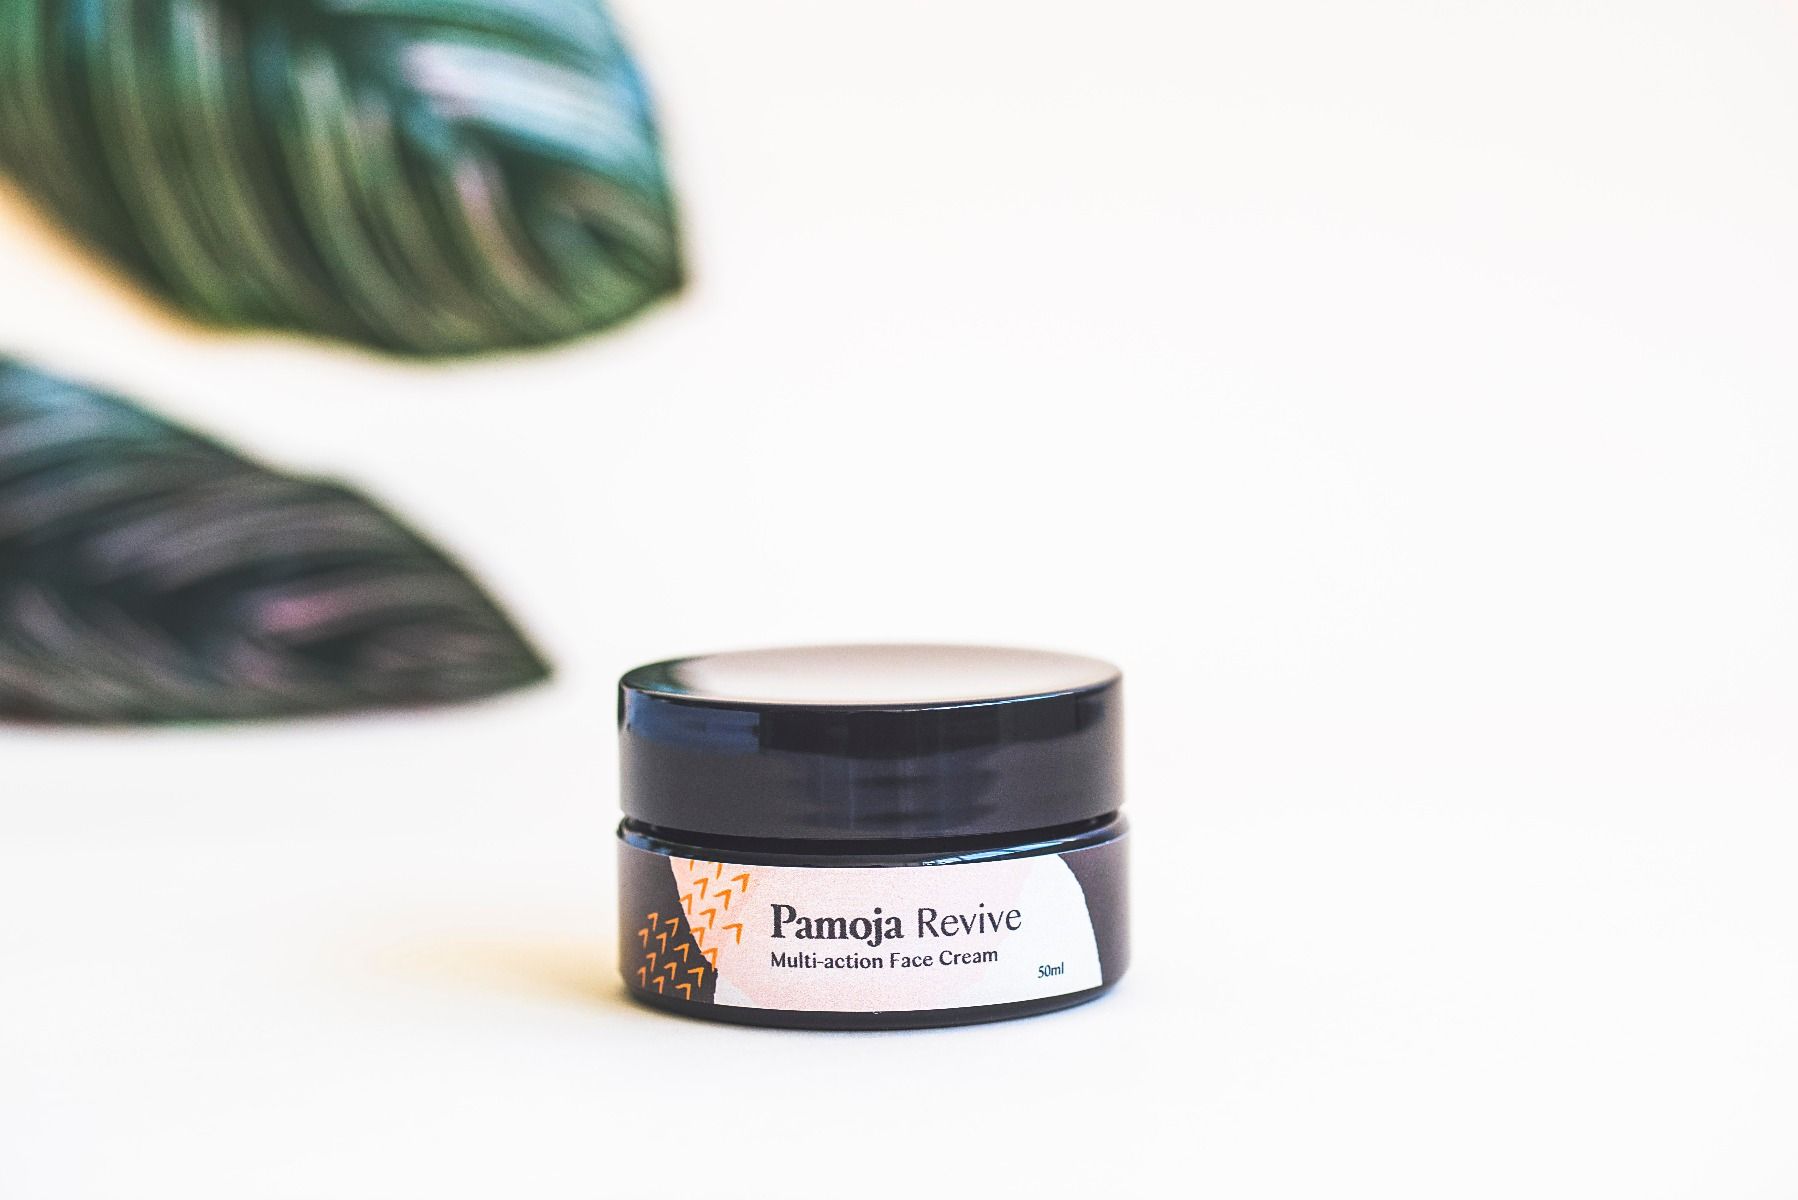 Pamoja – Revive Multi-action Face Cream Review